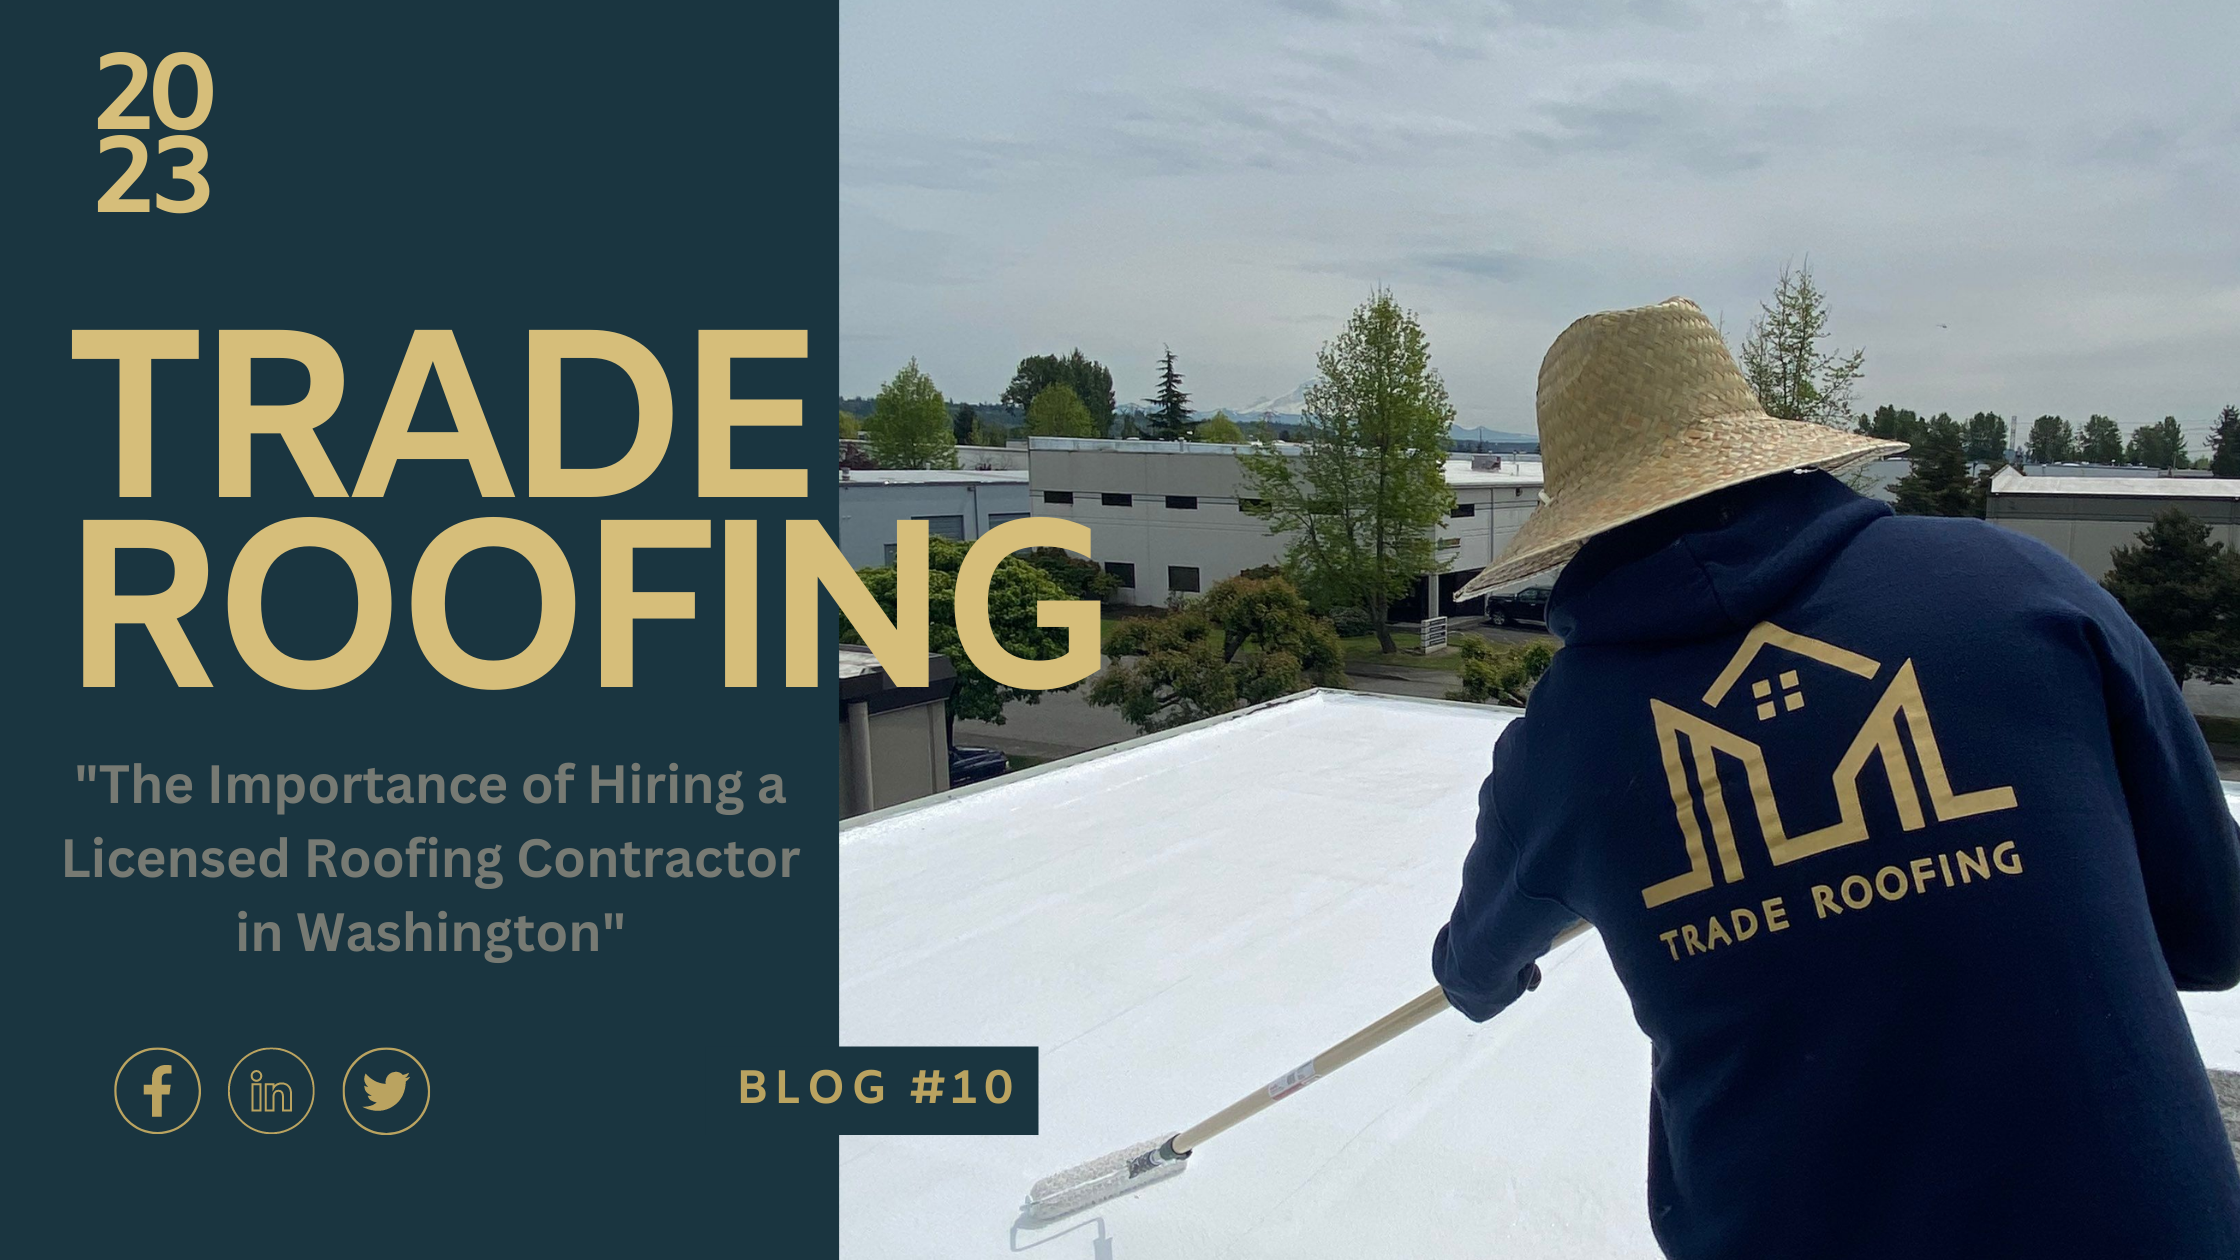 The Importance of Hiring a Licensed Roofing Contractor in Washington